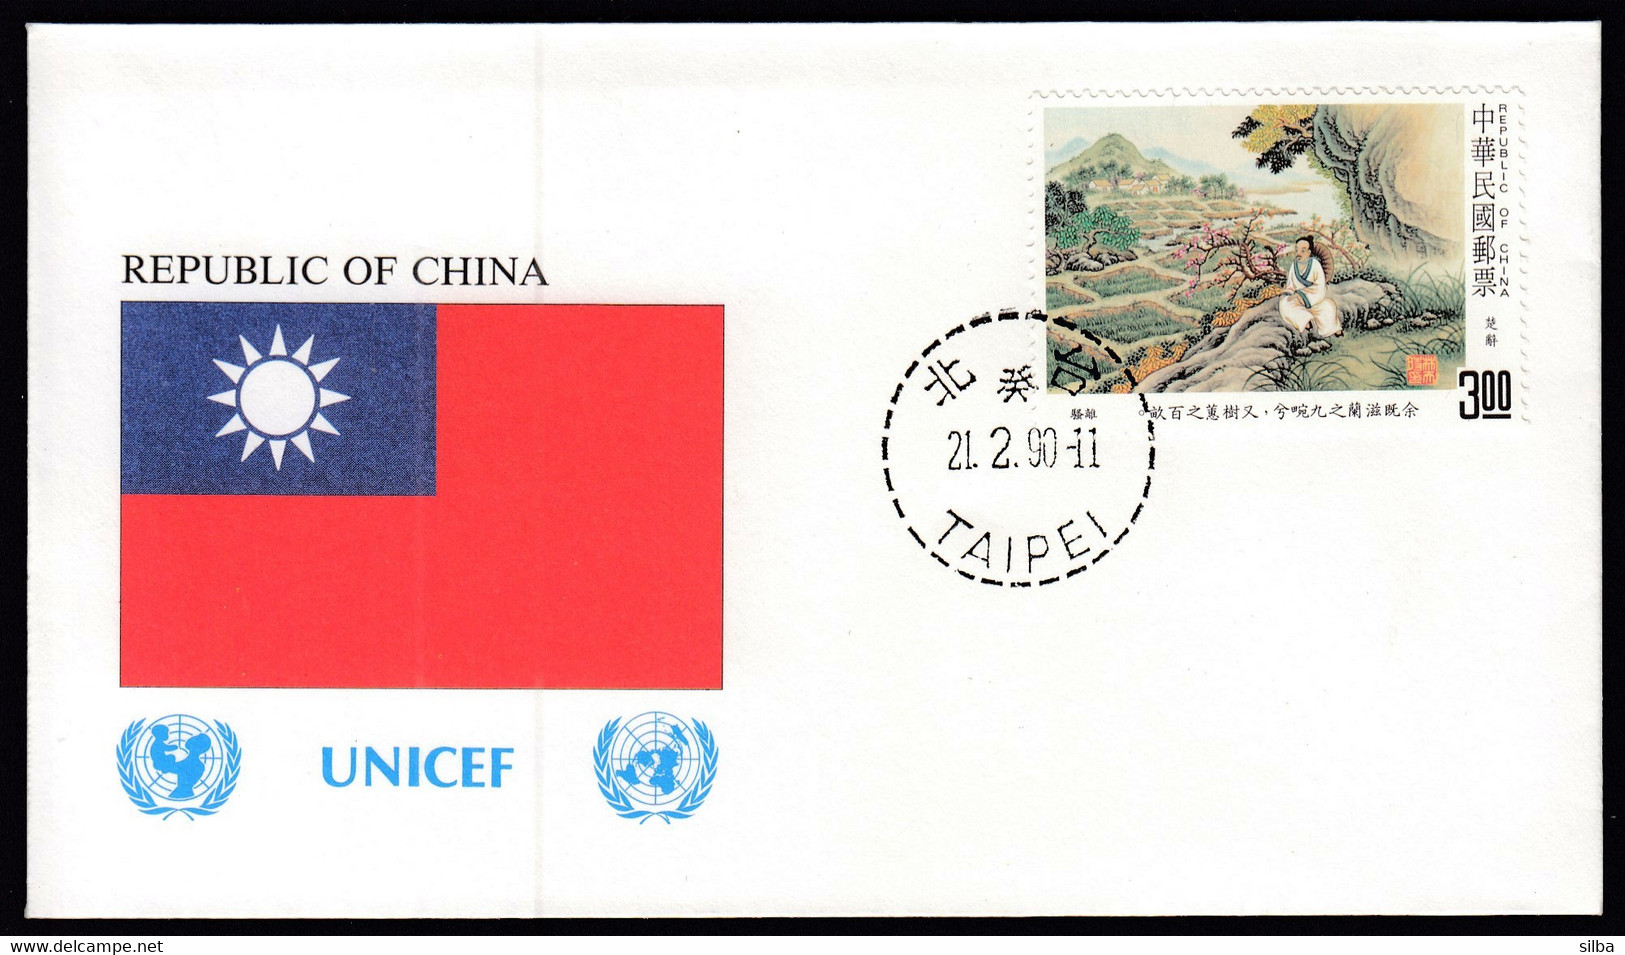 Republic Of China 1990 / Flag, Flags / UNICEF - Covers